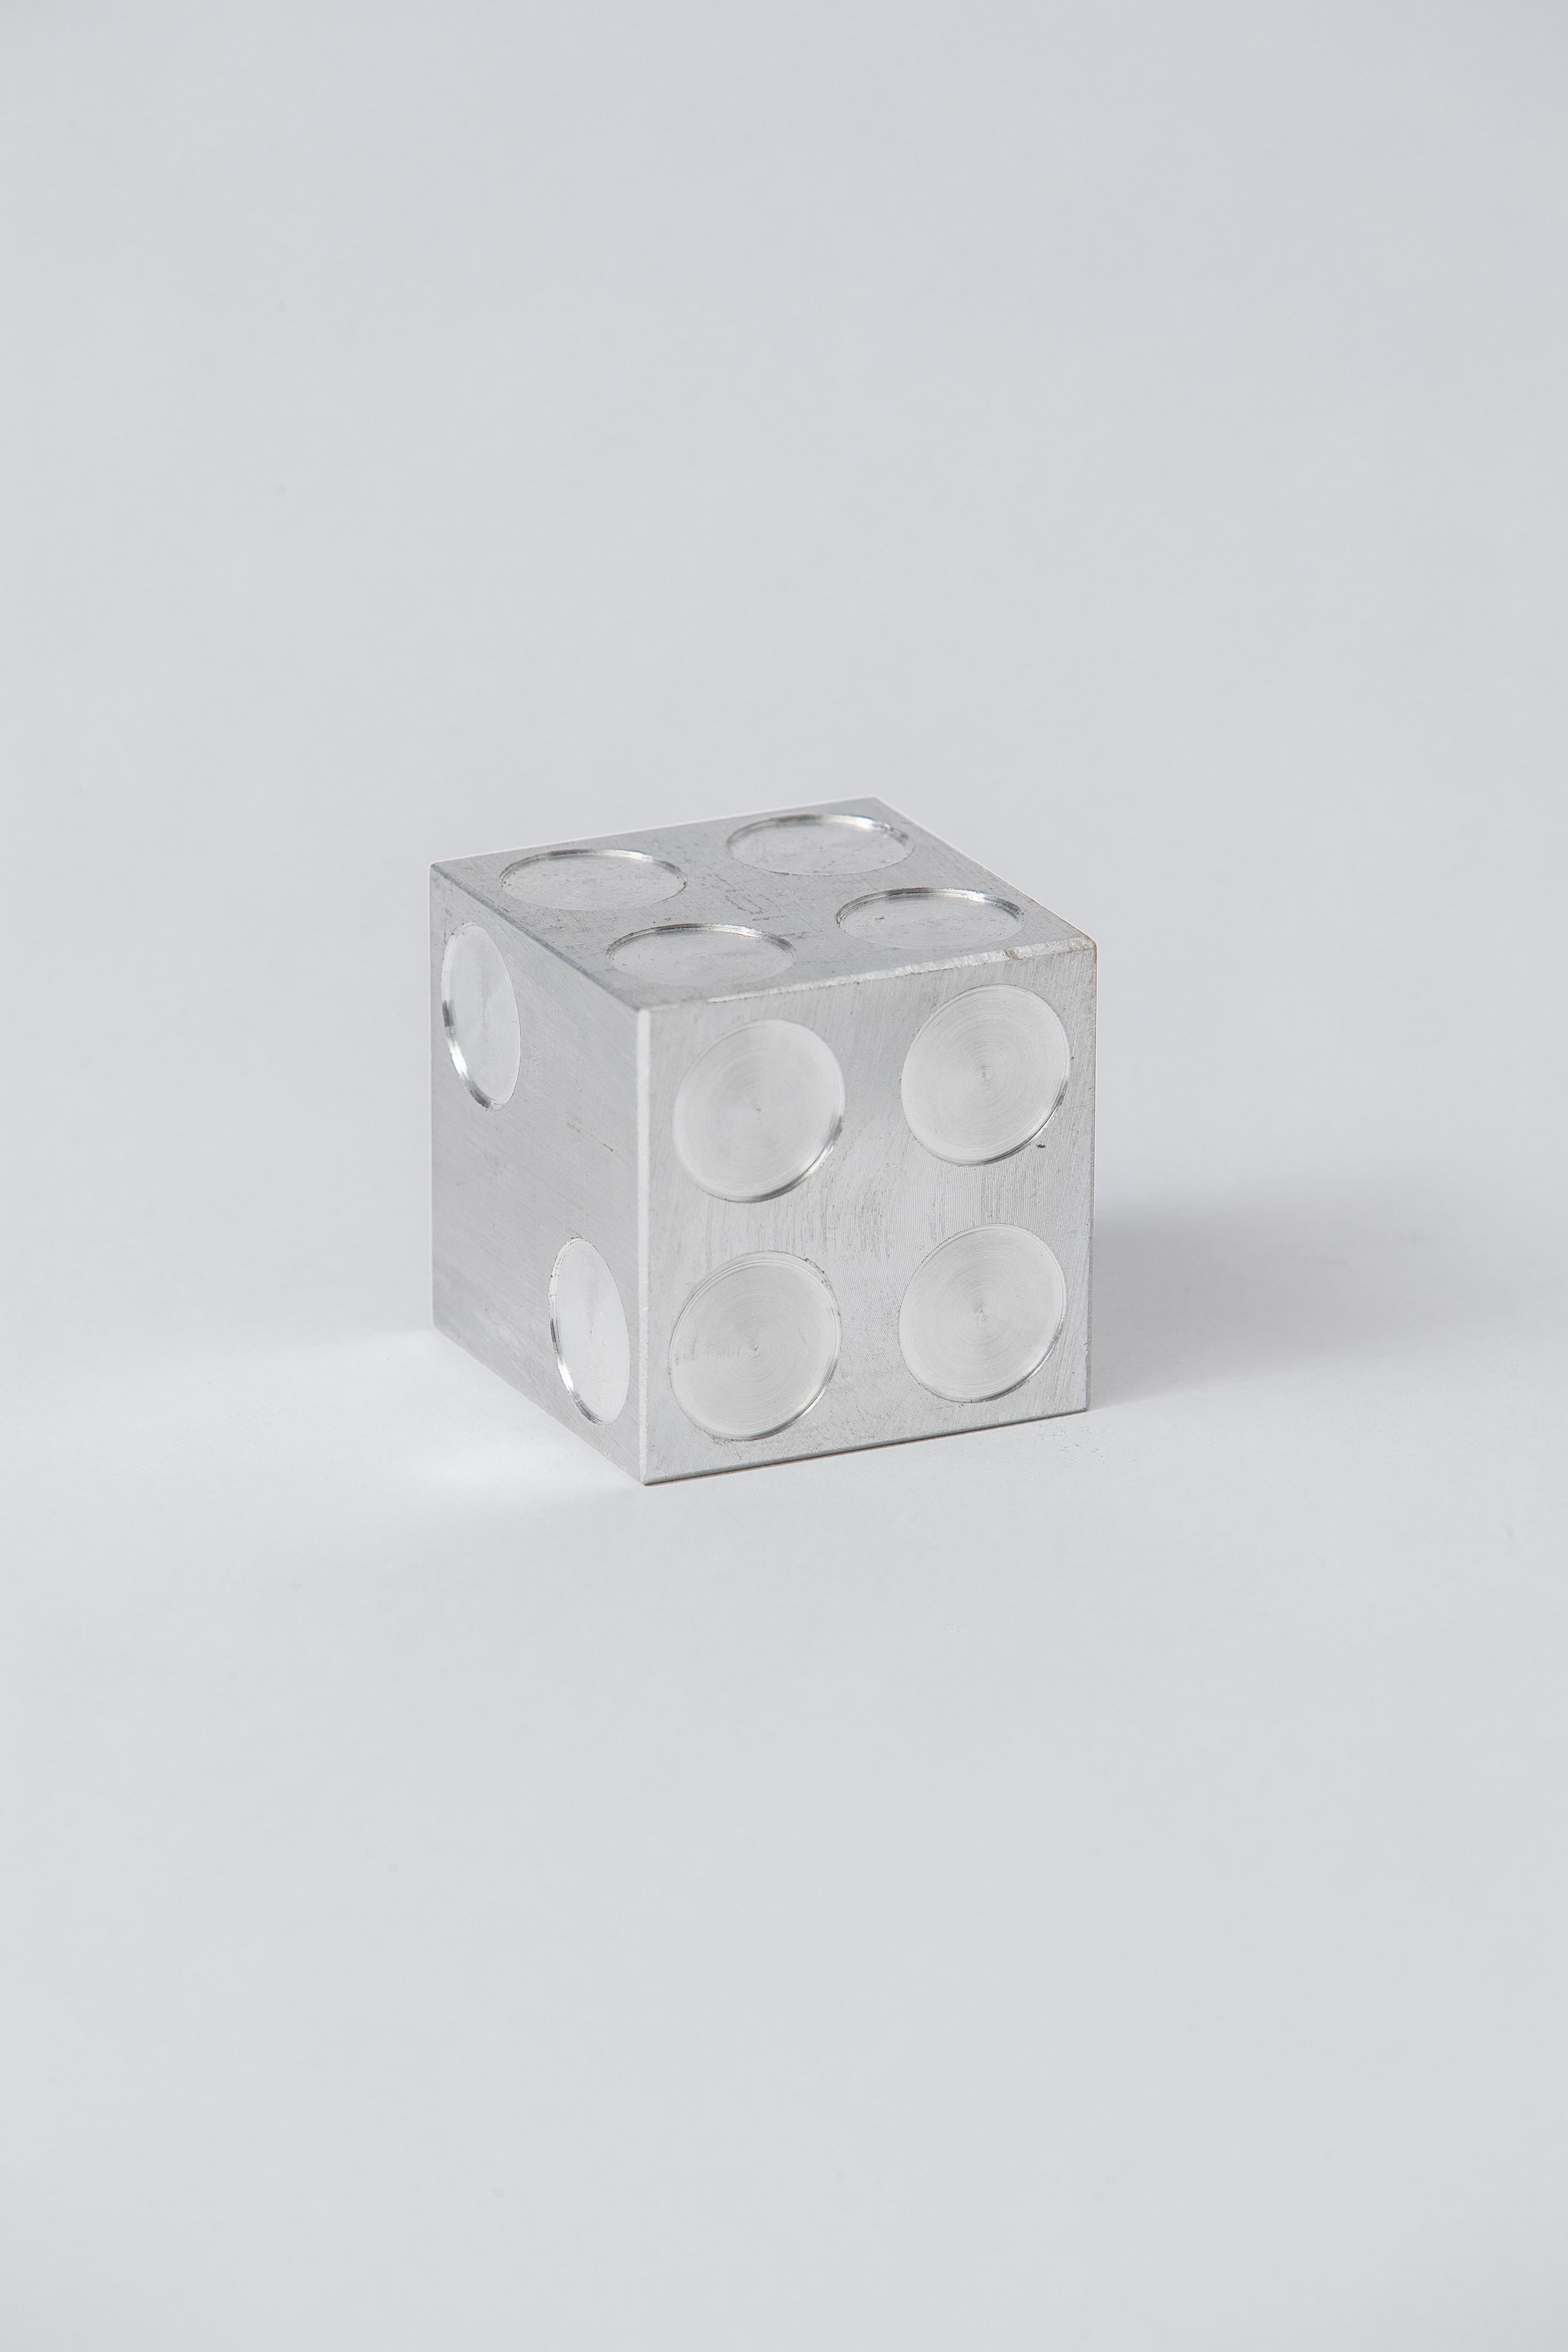 North American Sculpture of Stacked Machined Aluminum Blocks, USA, 1960's